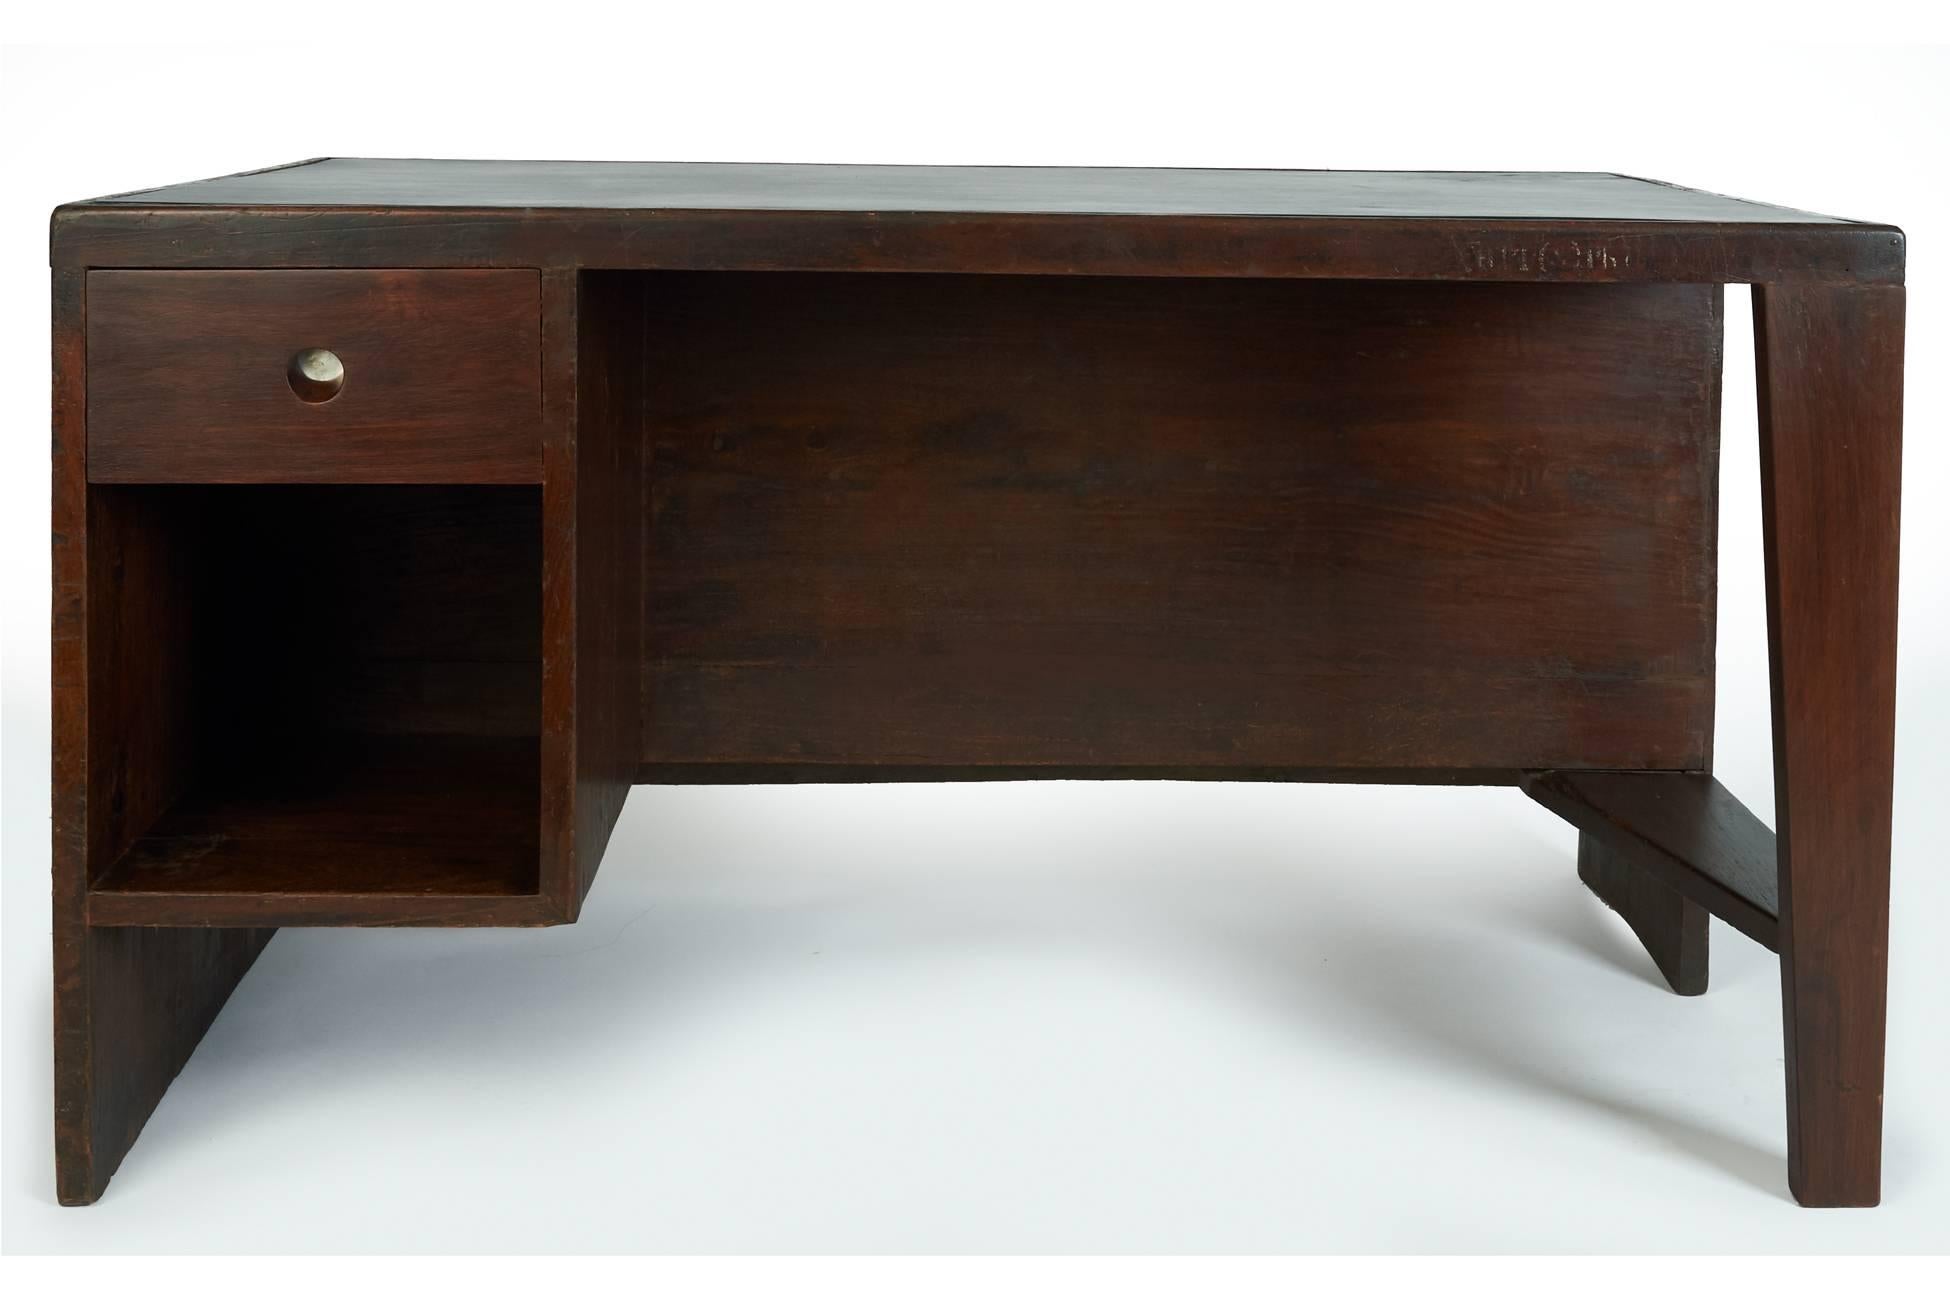 French Exceptional Chandigarh Pigeonhole Desk by Pierre Jeanneret, France/India c. 1957